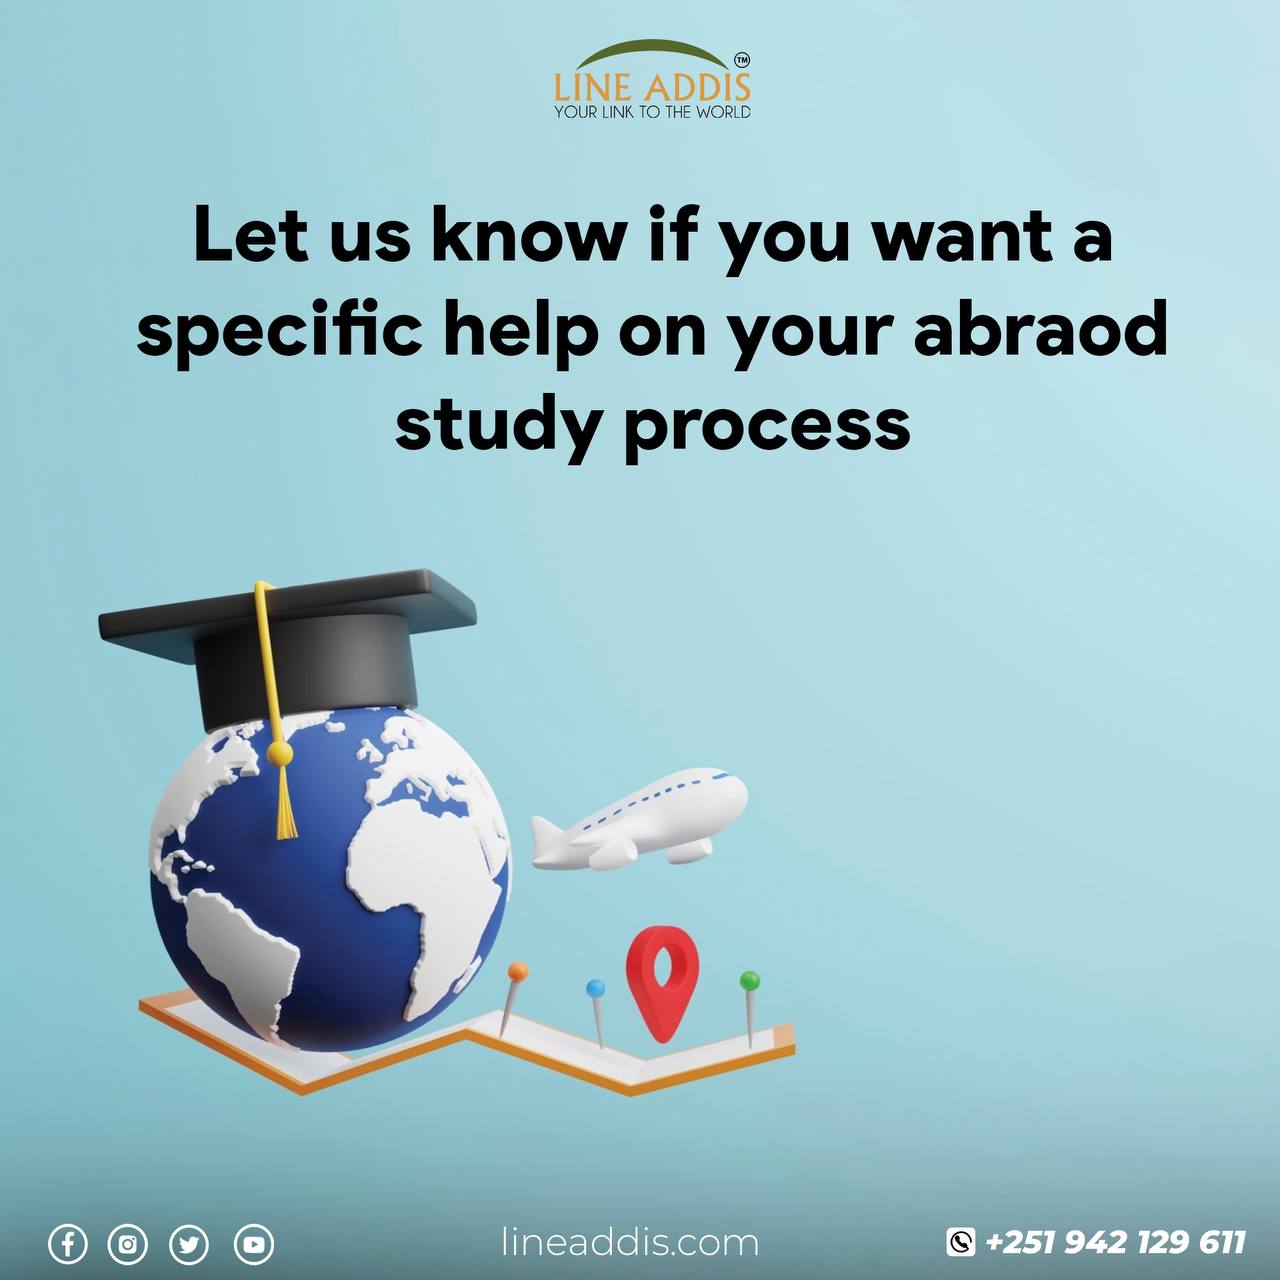 Have you started the study abroad process on your own